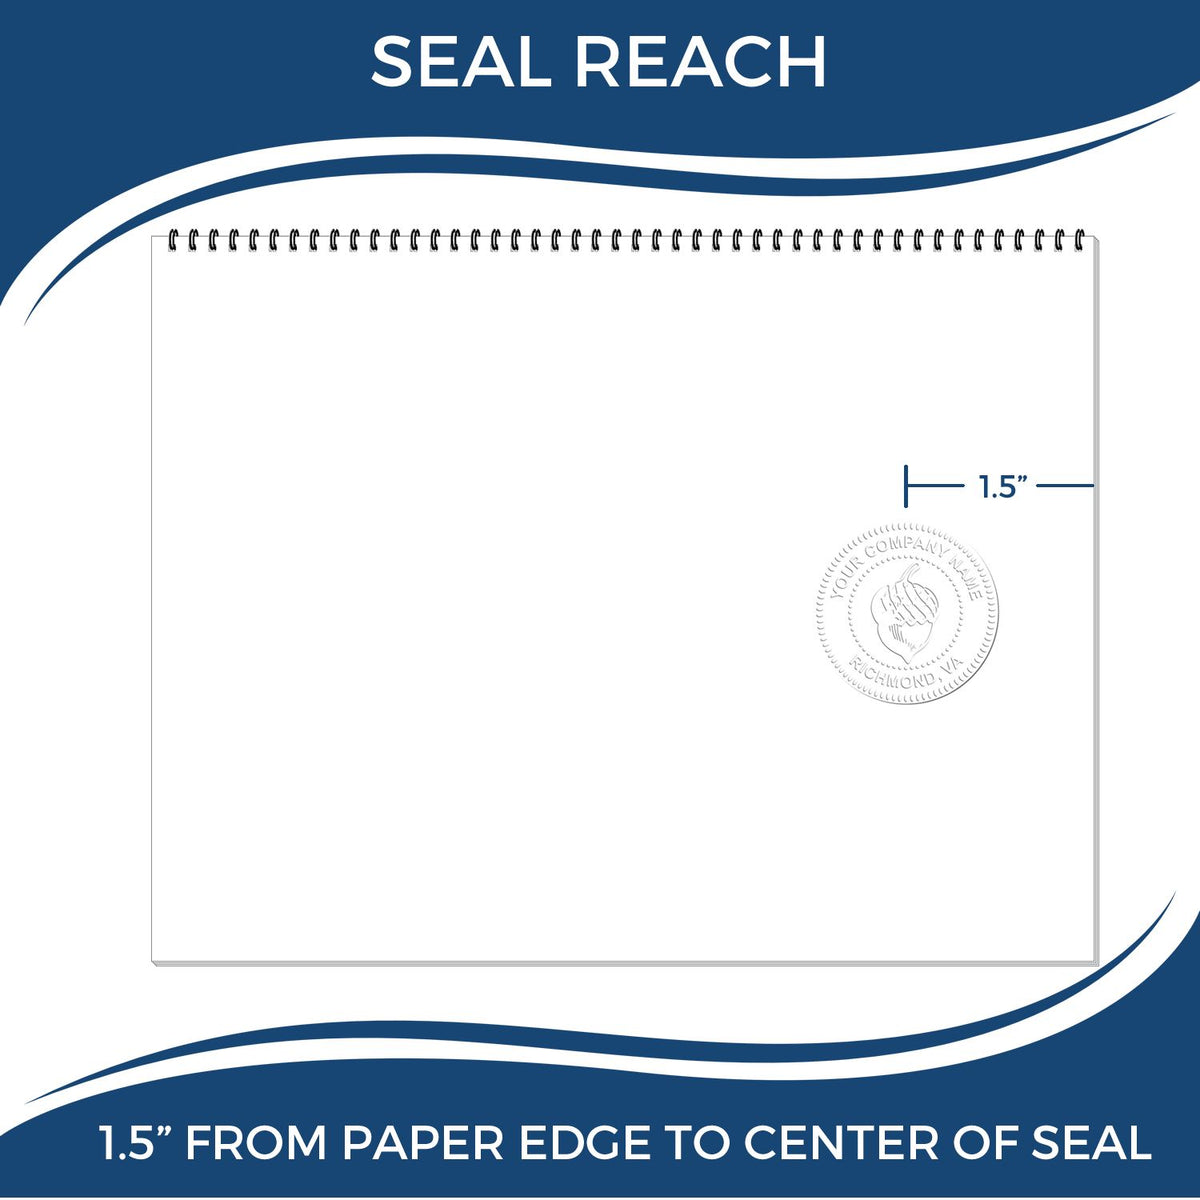 An infographic showing the seal reach which is represented by a ruler and a miniature seal image of the Hybrid Iowa Architect Seal